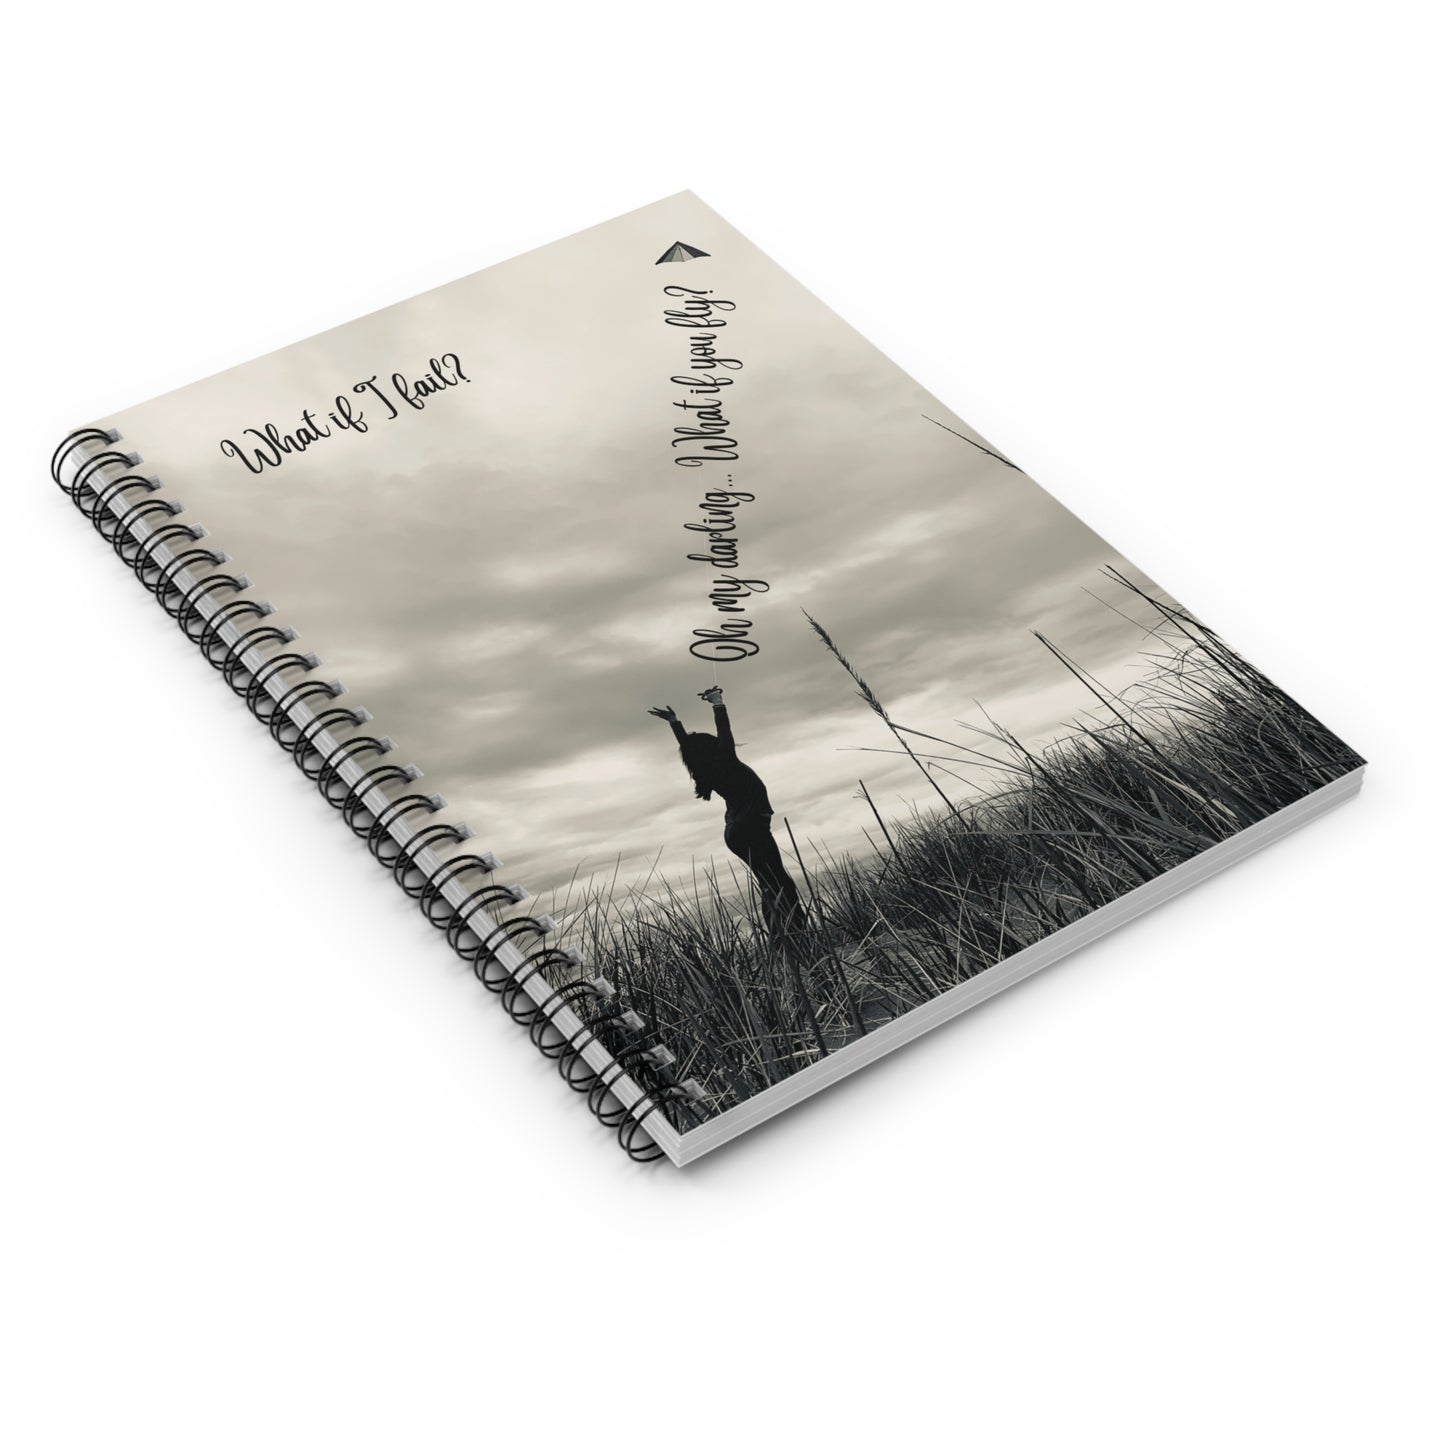 "What If You Fly?" Notebook for Dreamers, Thinkers, and Doers